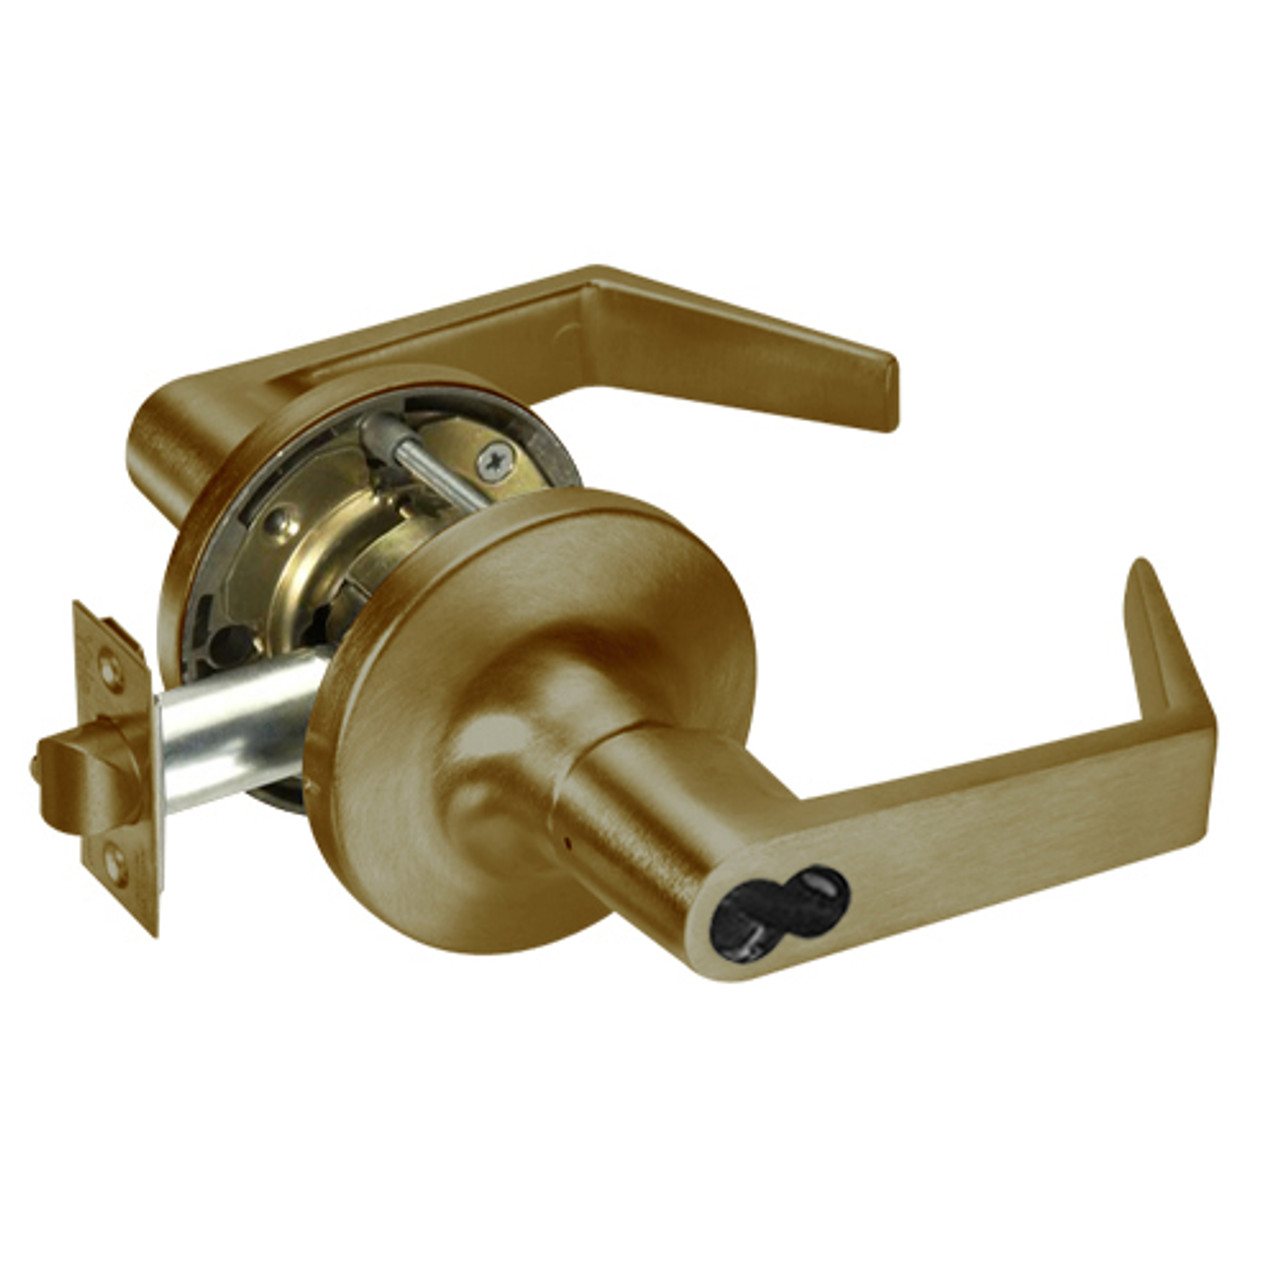 B-AU5407LN-609 Yale 5400LN Series Single Cylinder Entry Cylindrical Locks with Augusta Lever Prepped for SFIC in Antique Brass